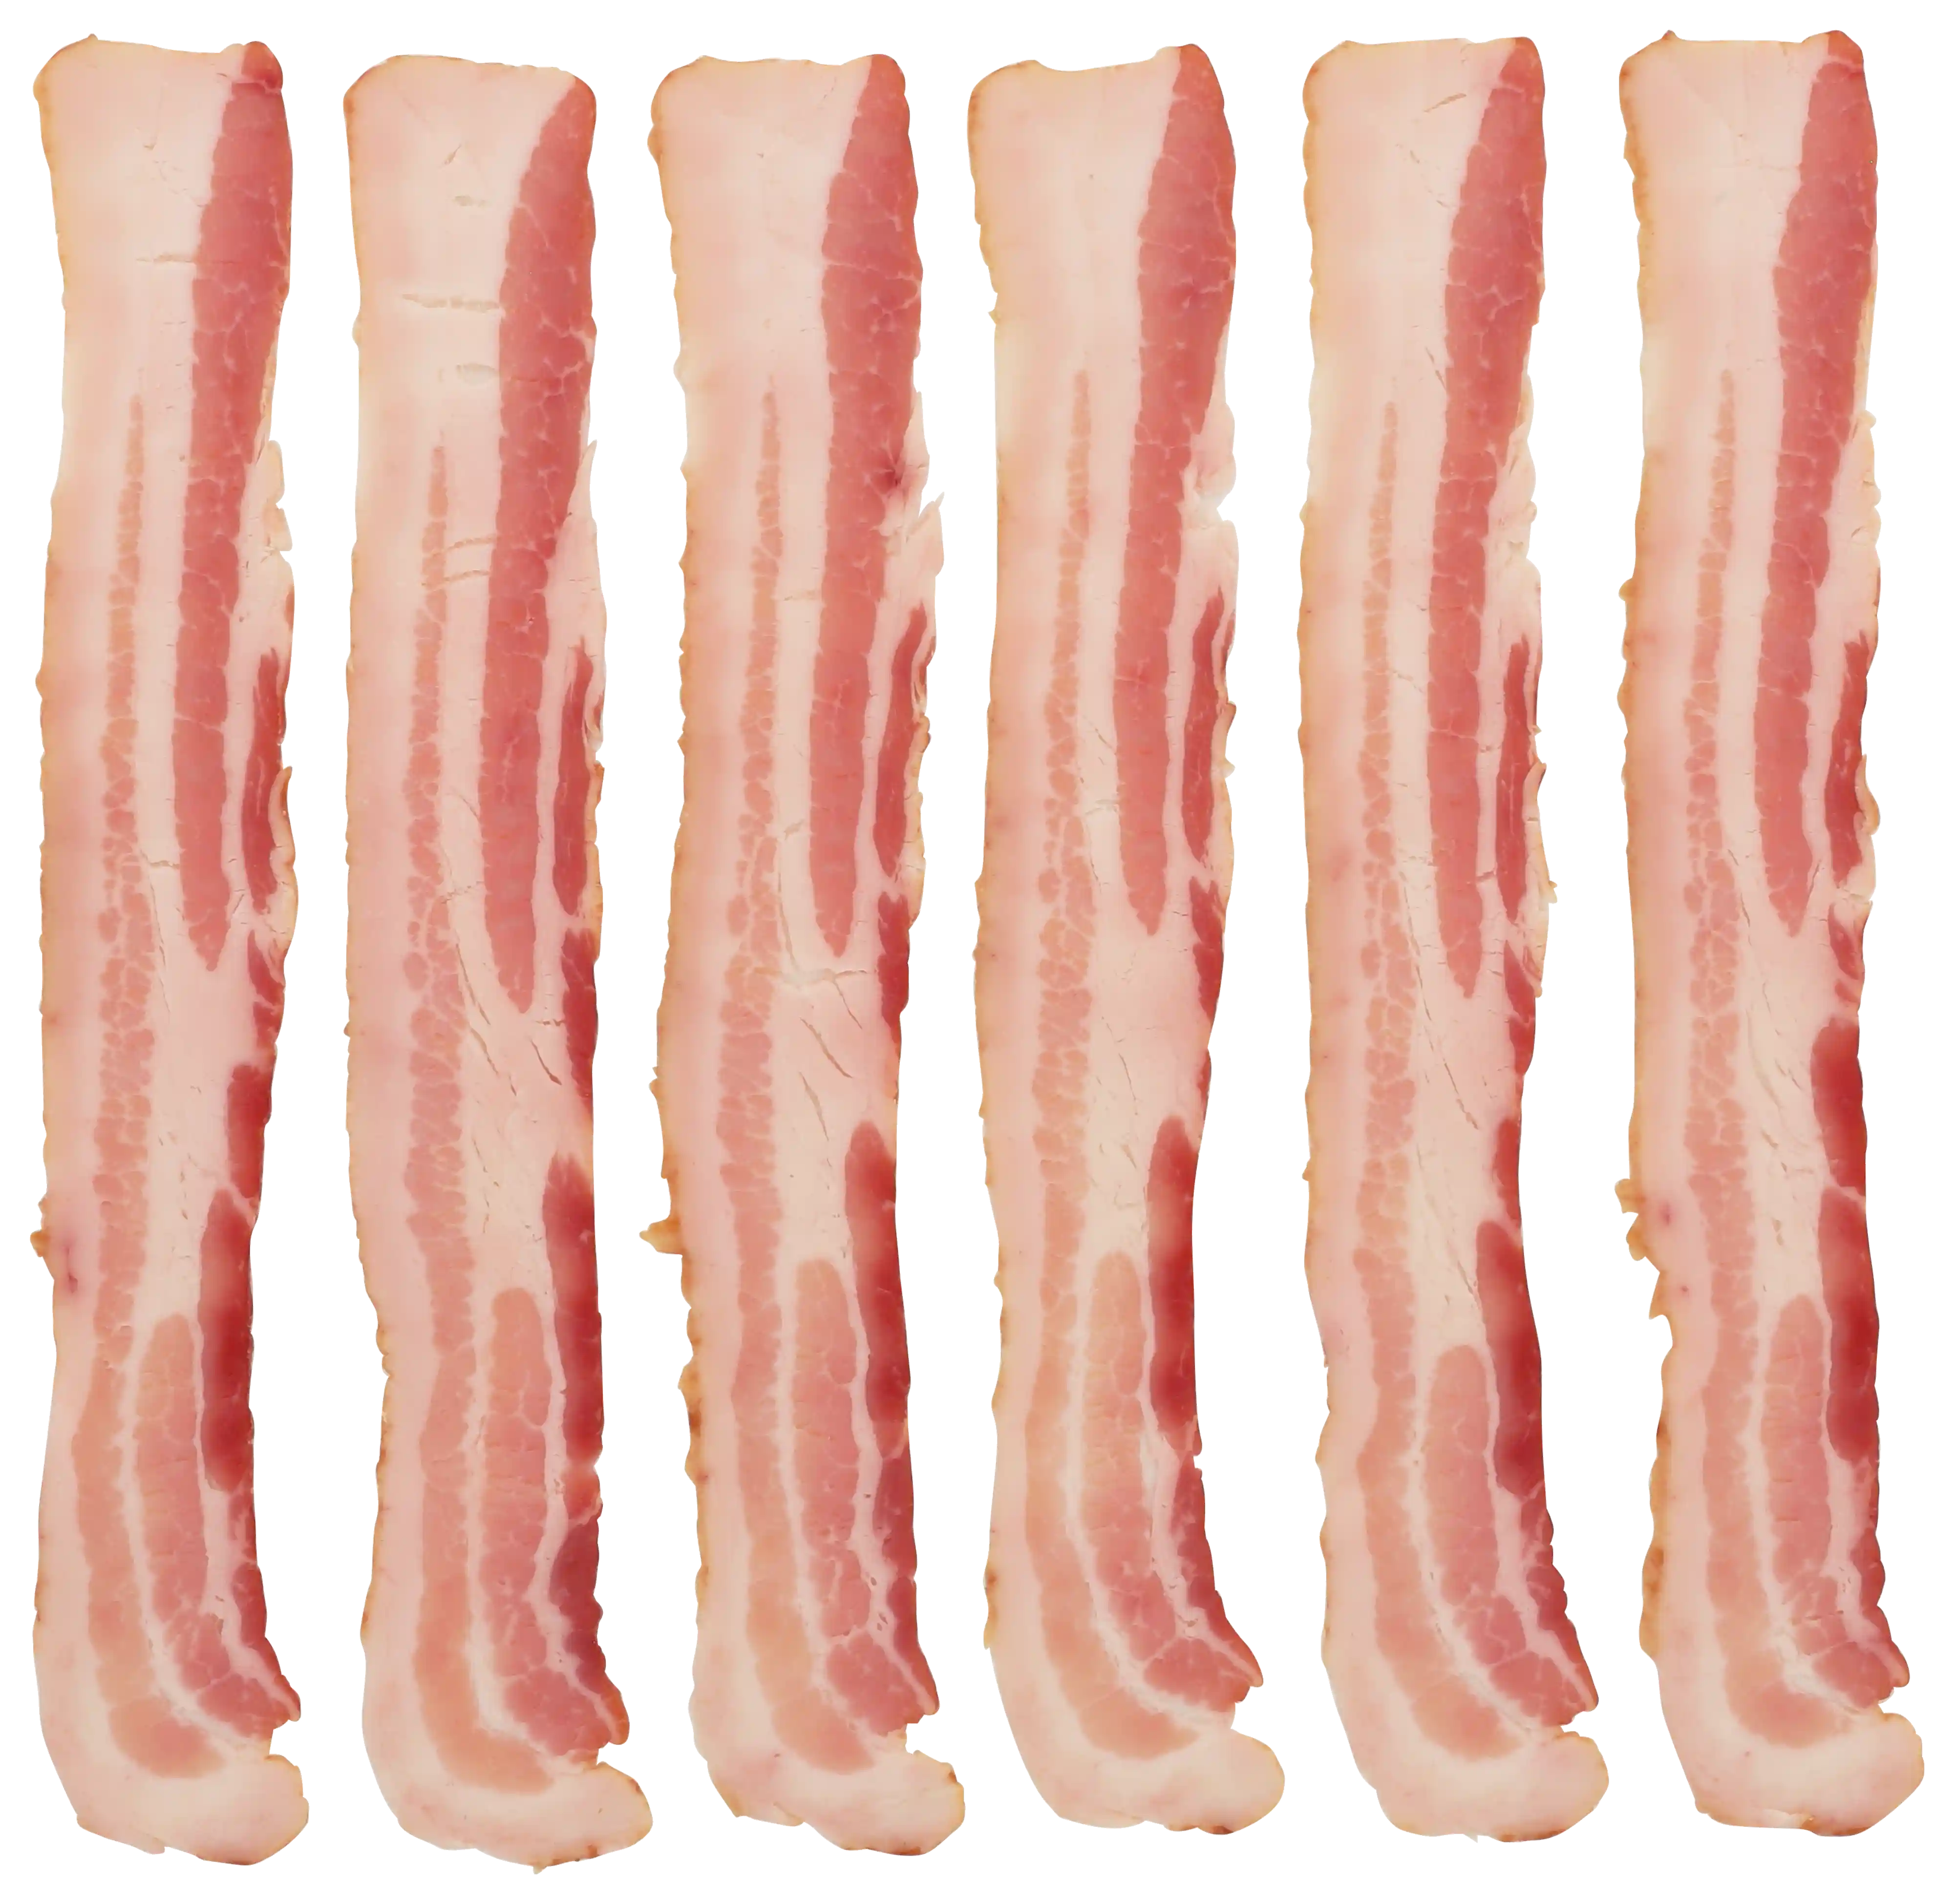 Wright® Brand Naturally Hickory Smoked Thick Sliced Bacon, Flat-Pack®, 15 Lbs, 10-14 Slices per Pound, Gas Flushed_image_11